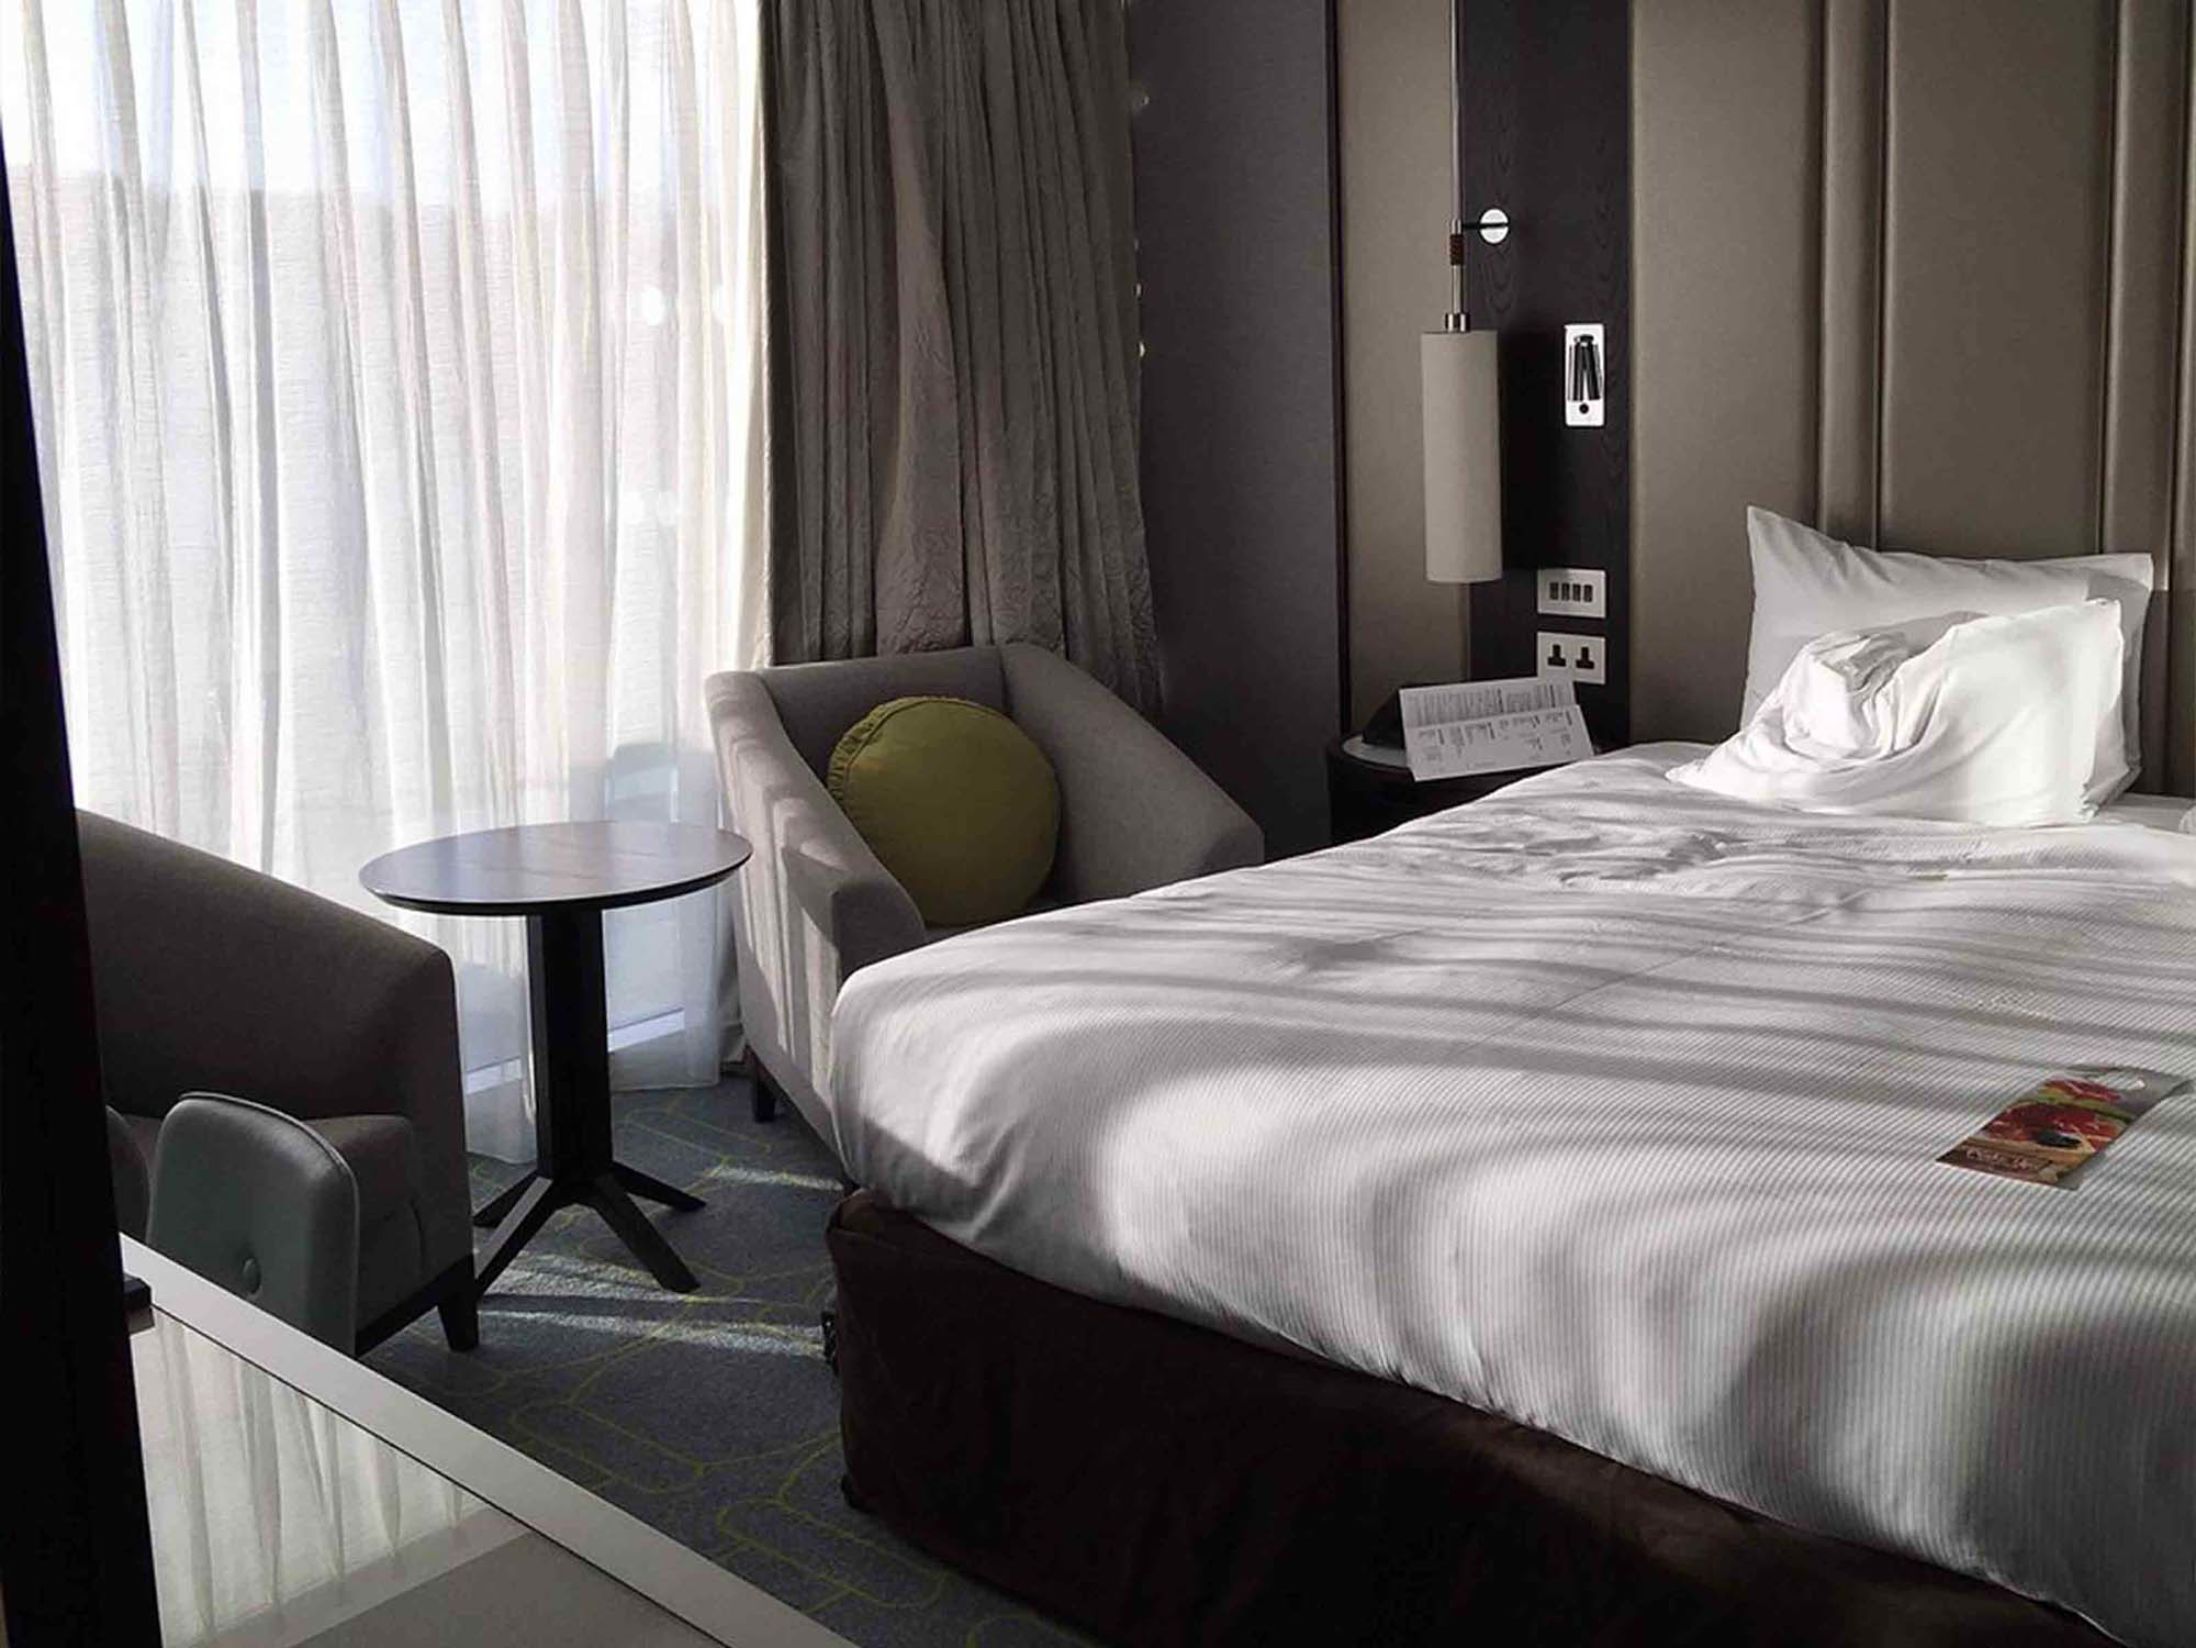 Best Hotels in Southampton - Hilton at the Ageas Bowl